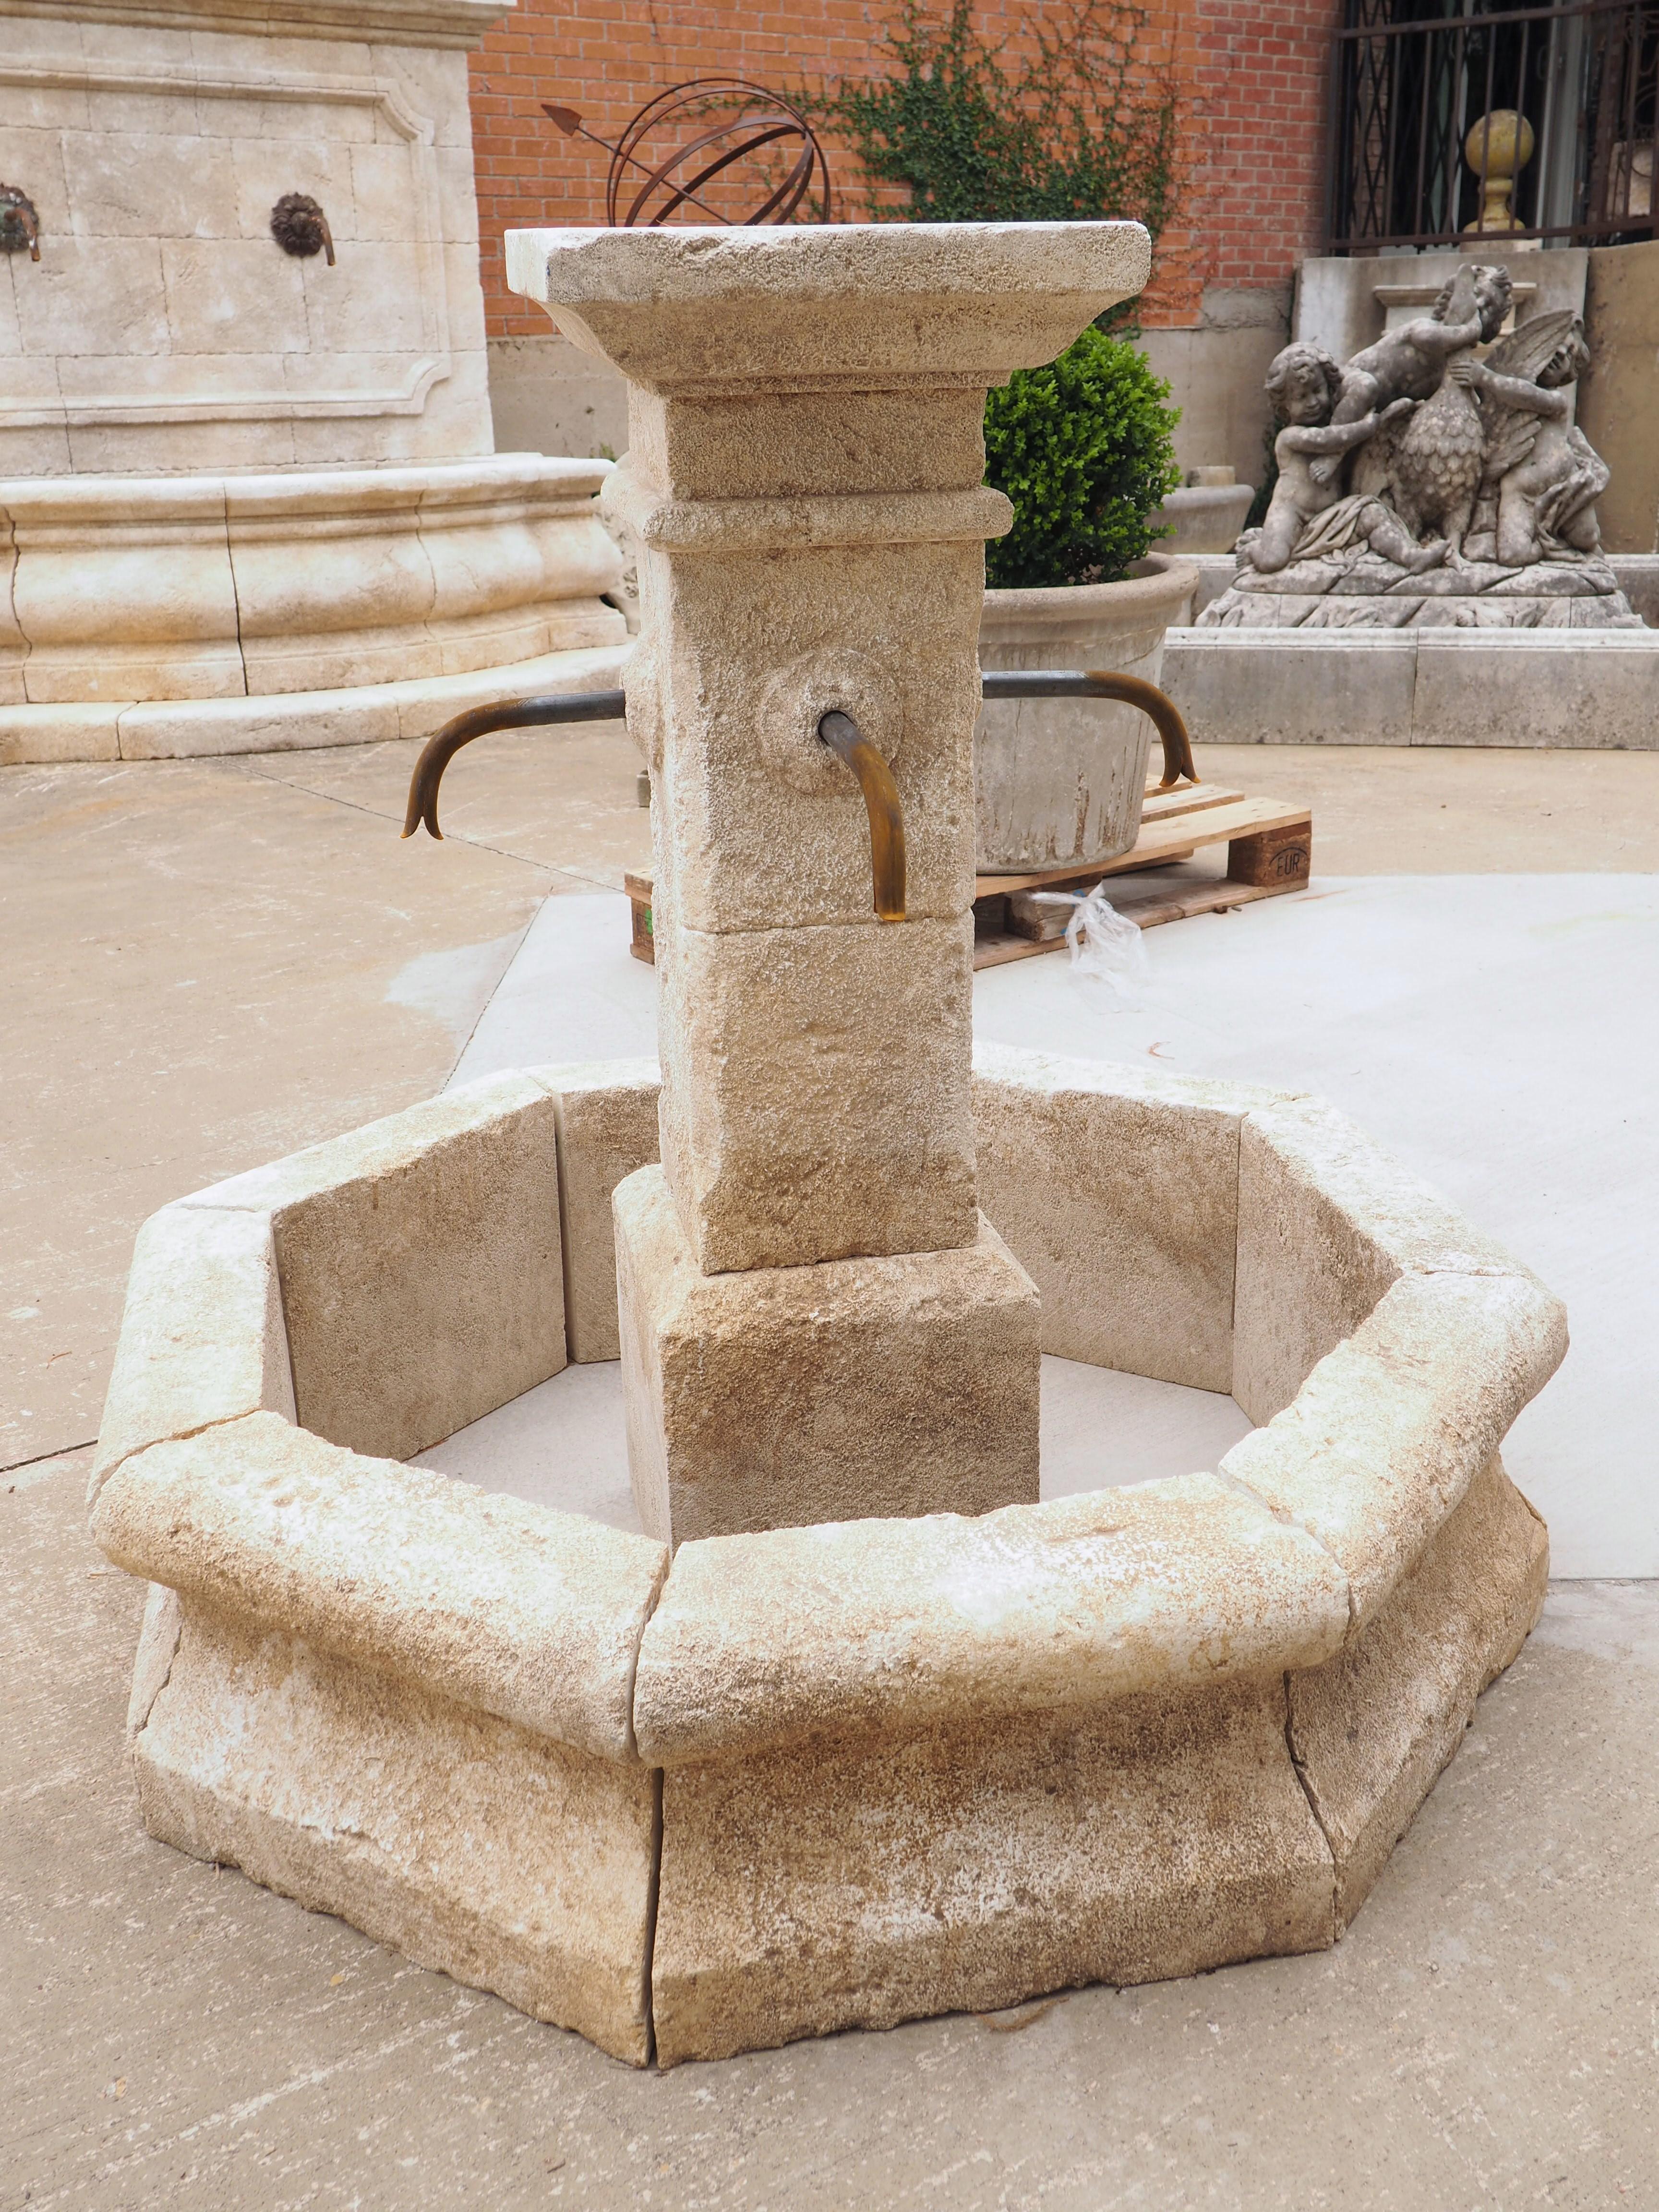 This small center fountain was hand-carved in Provence, in the South of France. Comprised of 13 pieces of stone, the fountain features an octagonal basin with a rectilinear column. Each of the eight basin wall stones have been carved with a large